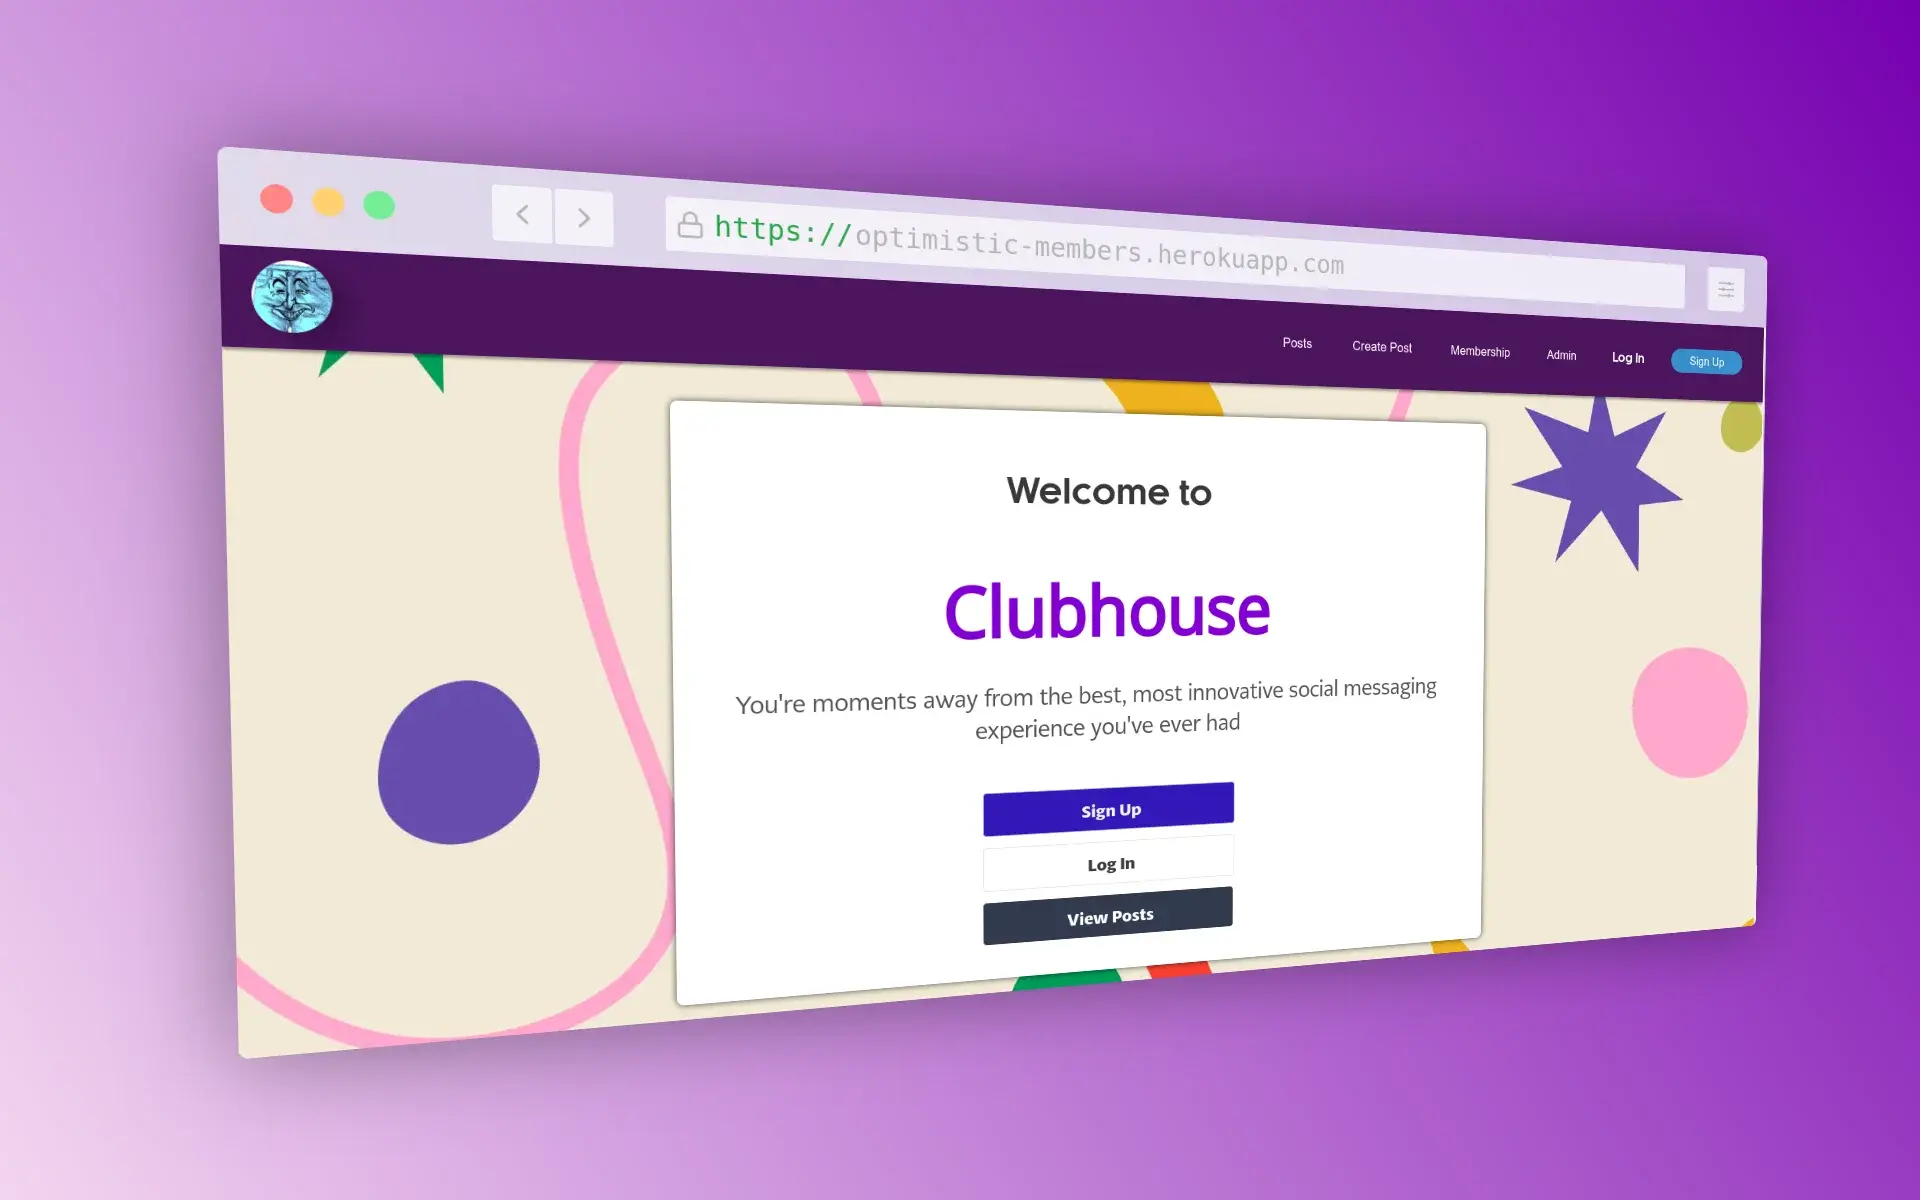 Screenshot of a webpage titled 'Welcome to Clubhouse' on the domain 'https://optimistic-members.herokuapp.com/'. The page has options like 'Posts', 'Create Post', 'Membership', 'Admin', 'Log In', and 'Sign Up'. There's a call to action with the text 'You're moments away from the best, most innovative social messaging experience you've ever had' above 'Sign Up' and 'Log In' buttons. The design features pastel colors and a browser icon that resembles a face.